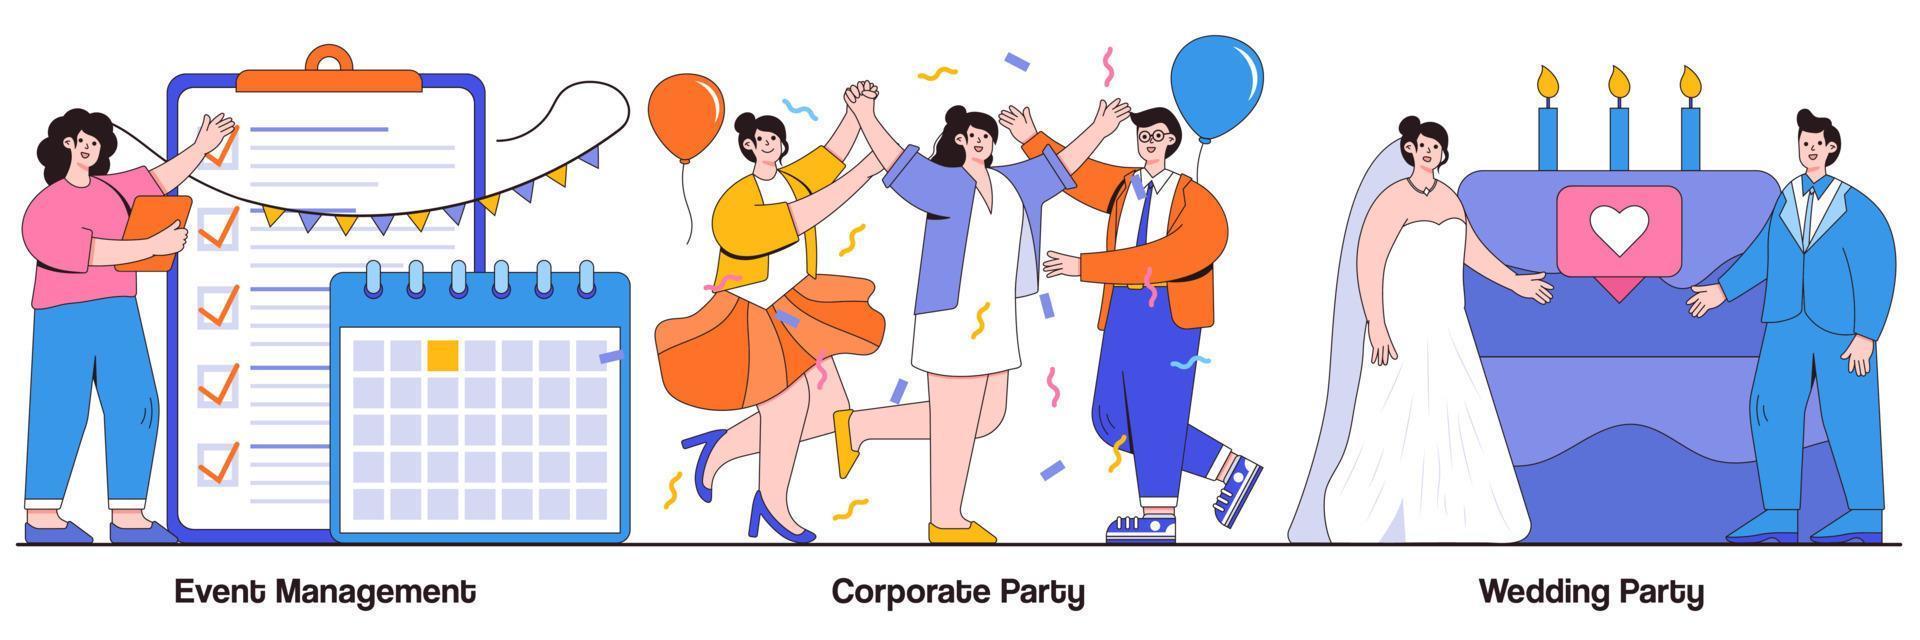 Event management, corporate and wedding party concept with people character. Entertainment service vector illustration set. Meeting organizer, planning service, team building, celebration metaphor